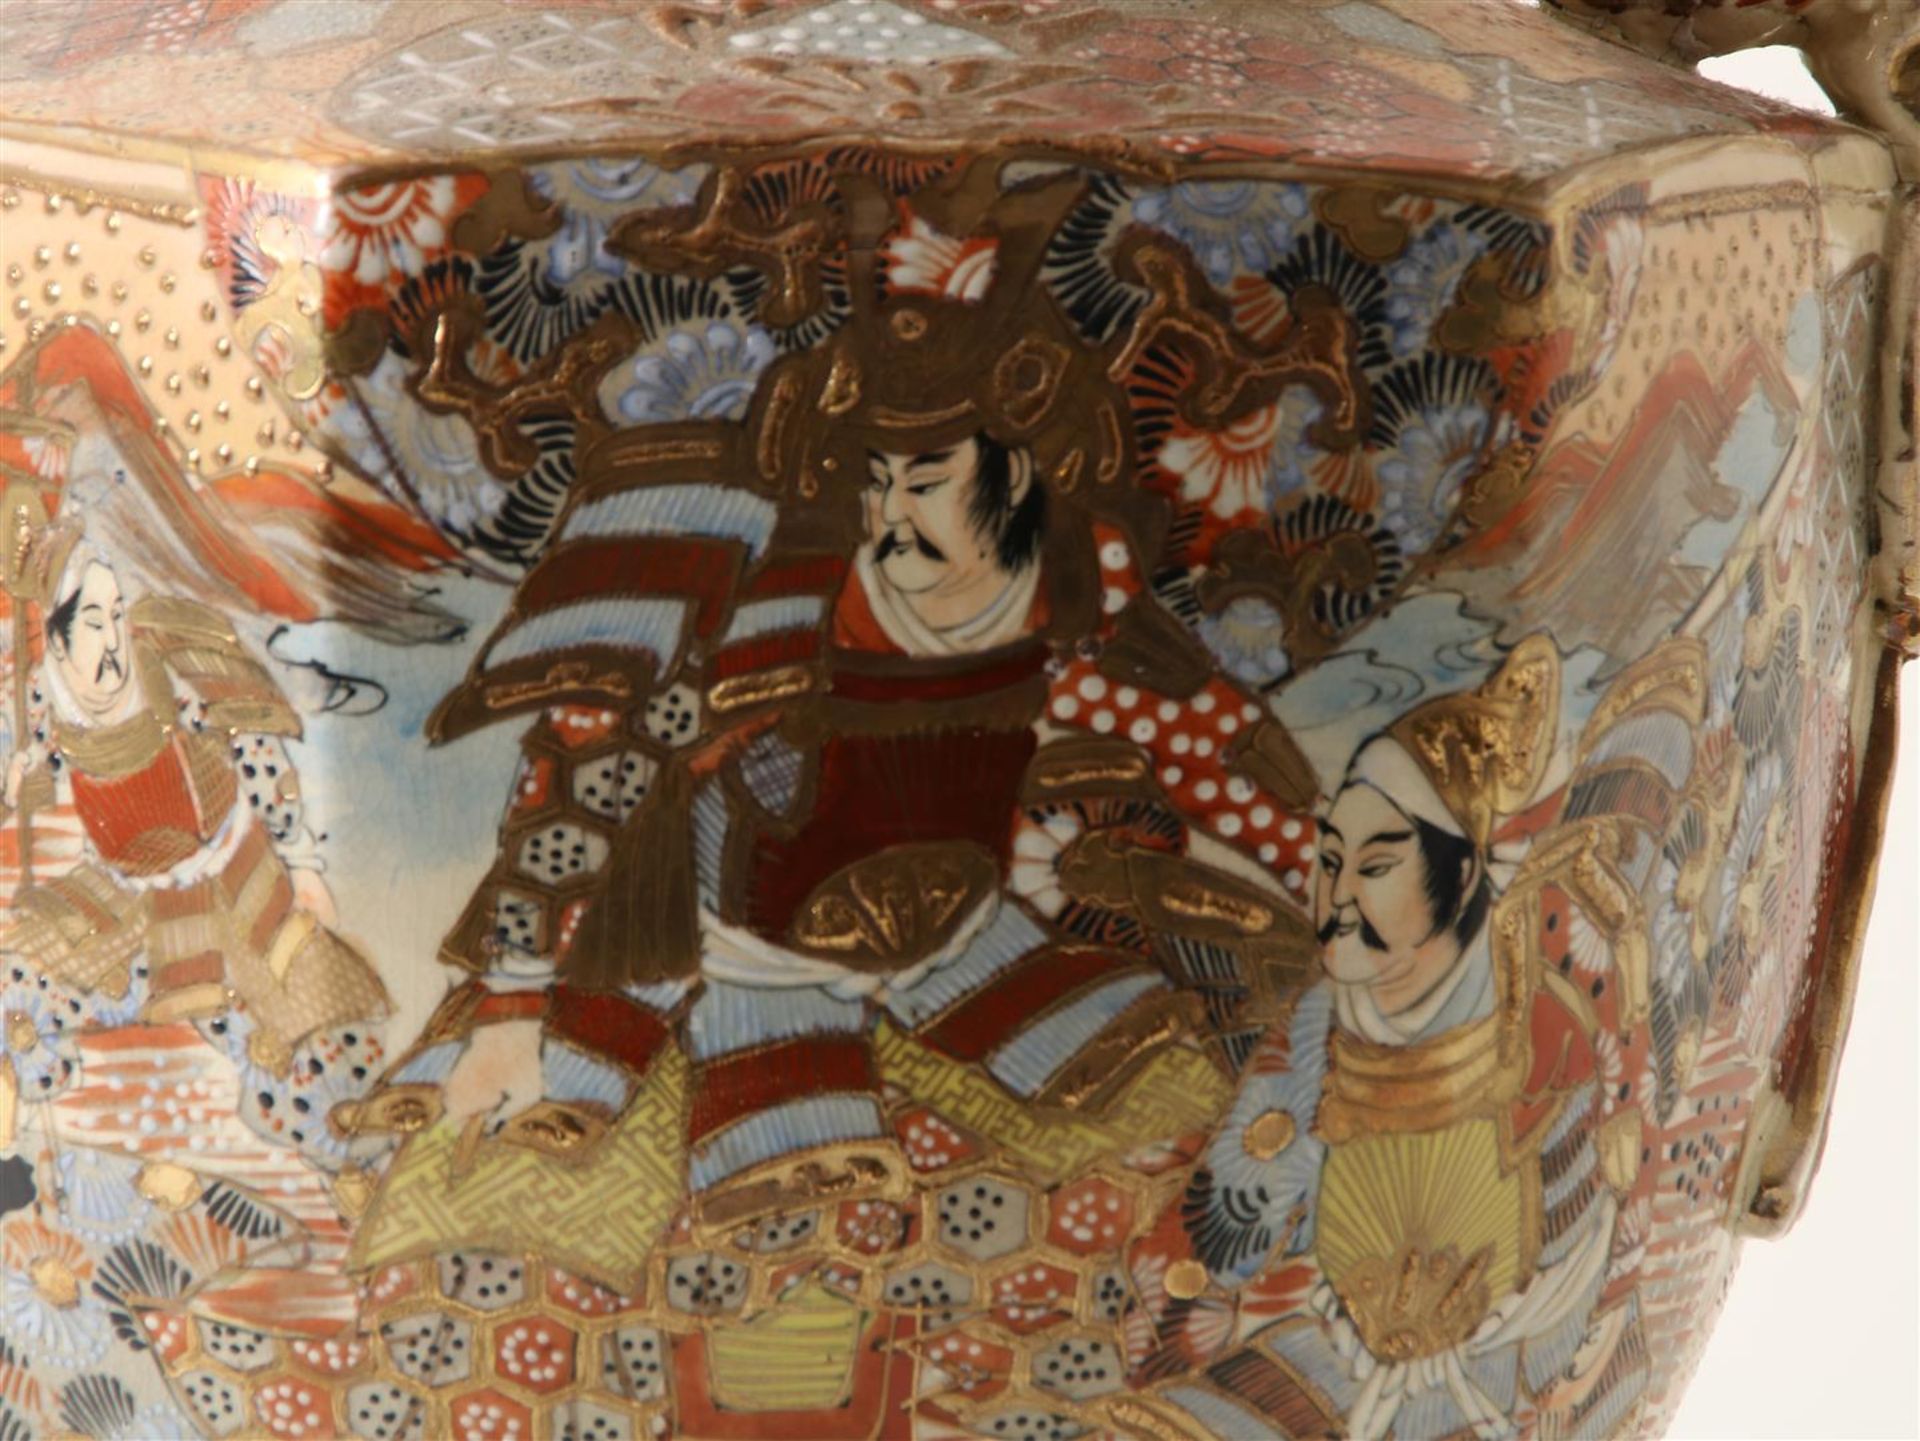 Porcelain Satsuma lid vase, lid crowned with temple lion ((glued), vase with decor of warriors in - Image 3 of 5